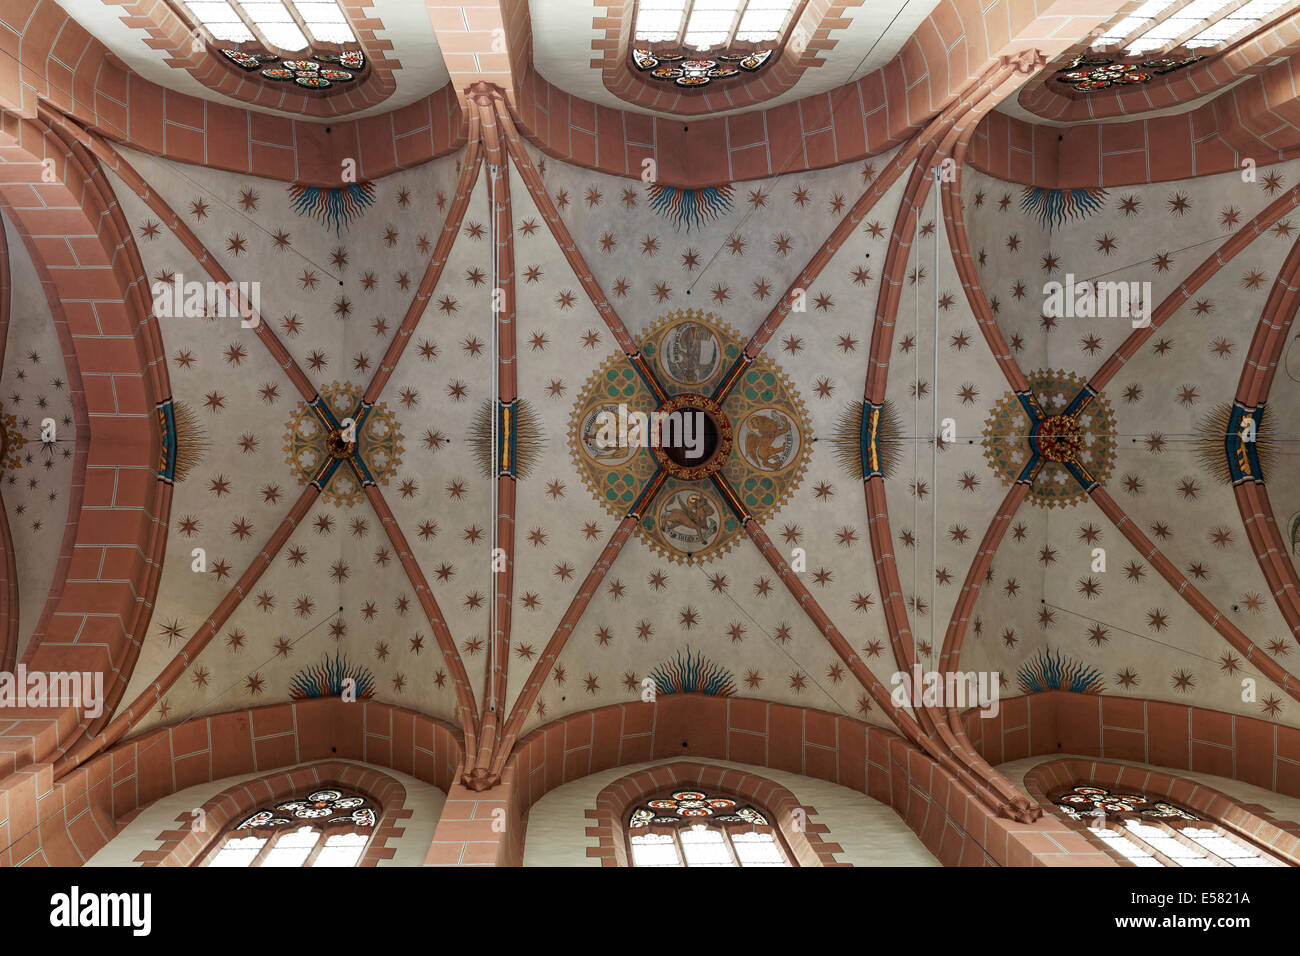 Gothic ribbed vaults with paintings, Church of Our Lady, Oberwesel, Rhineland-Palatinate, Germany Stock Photo